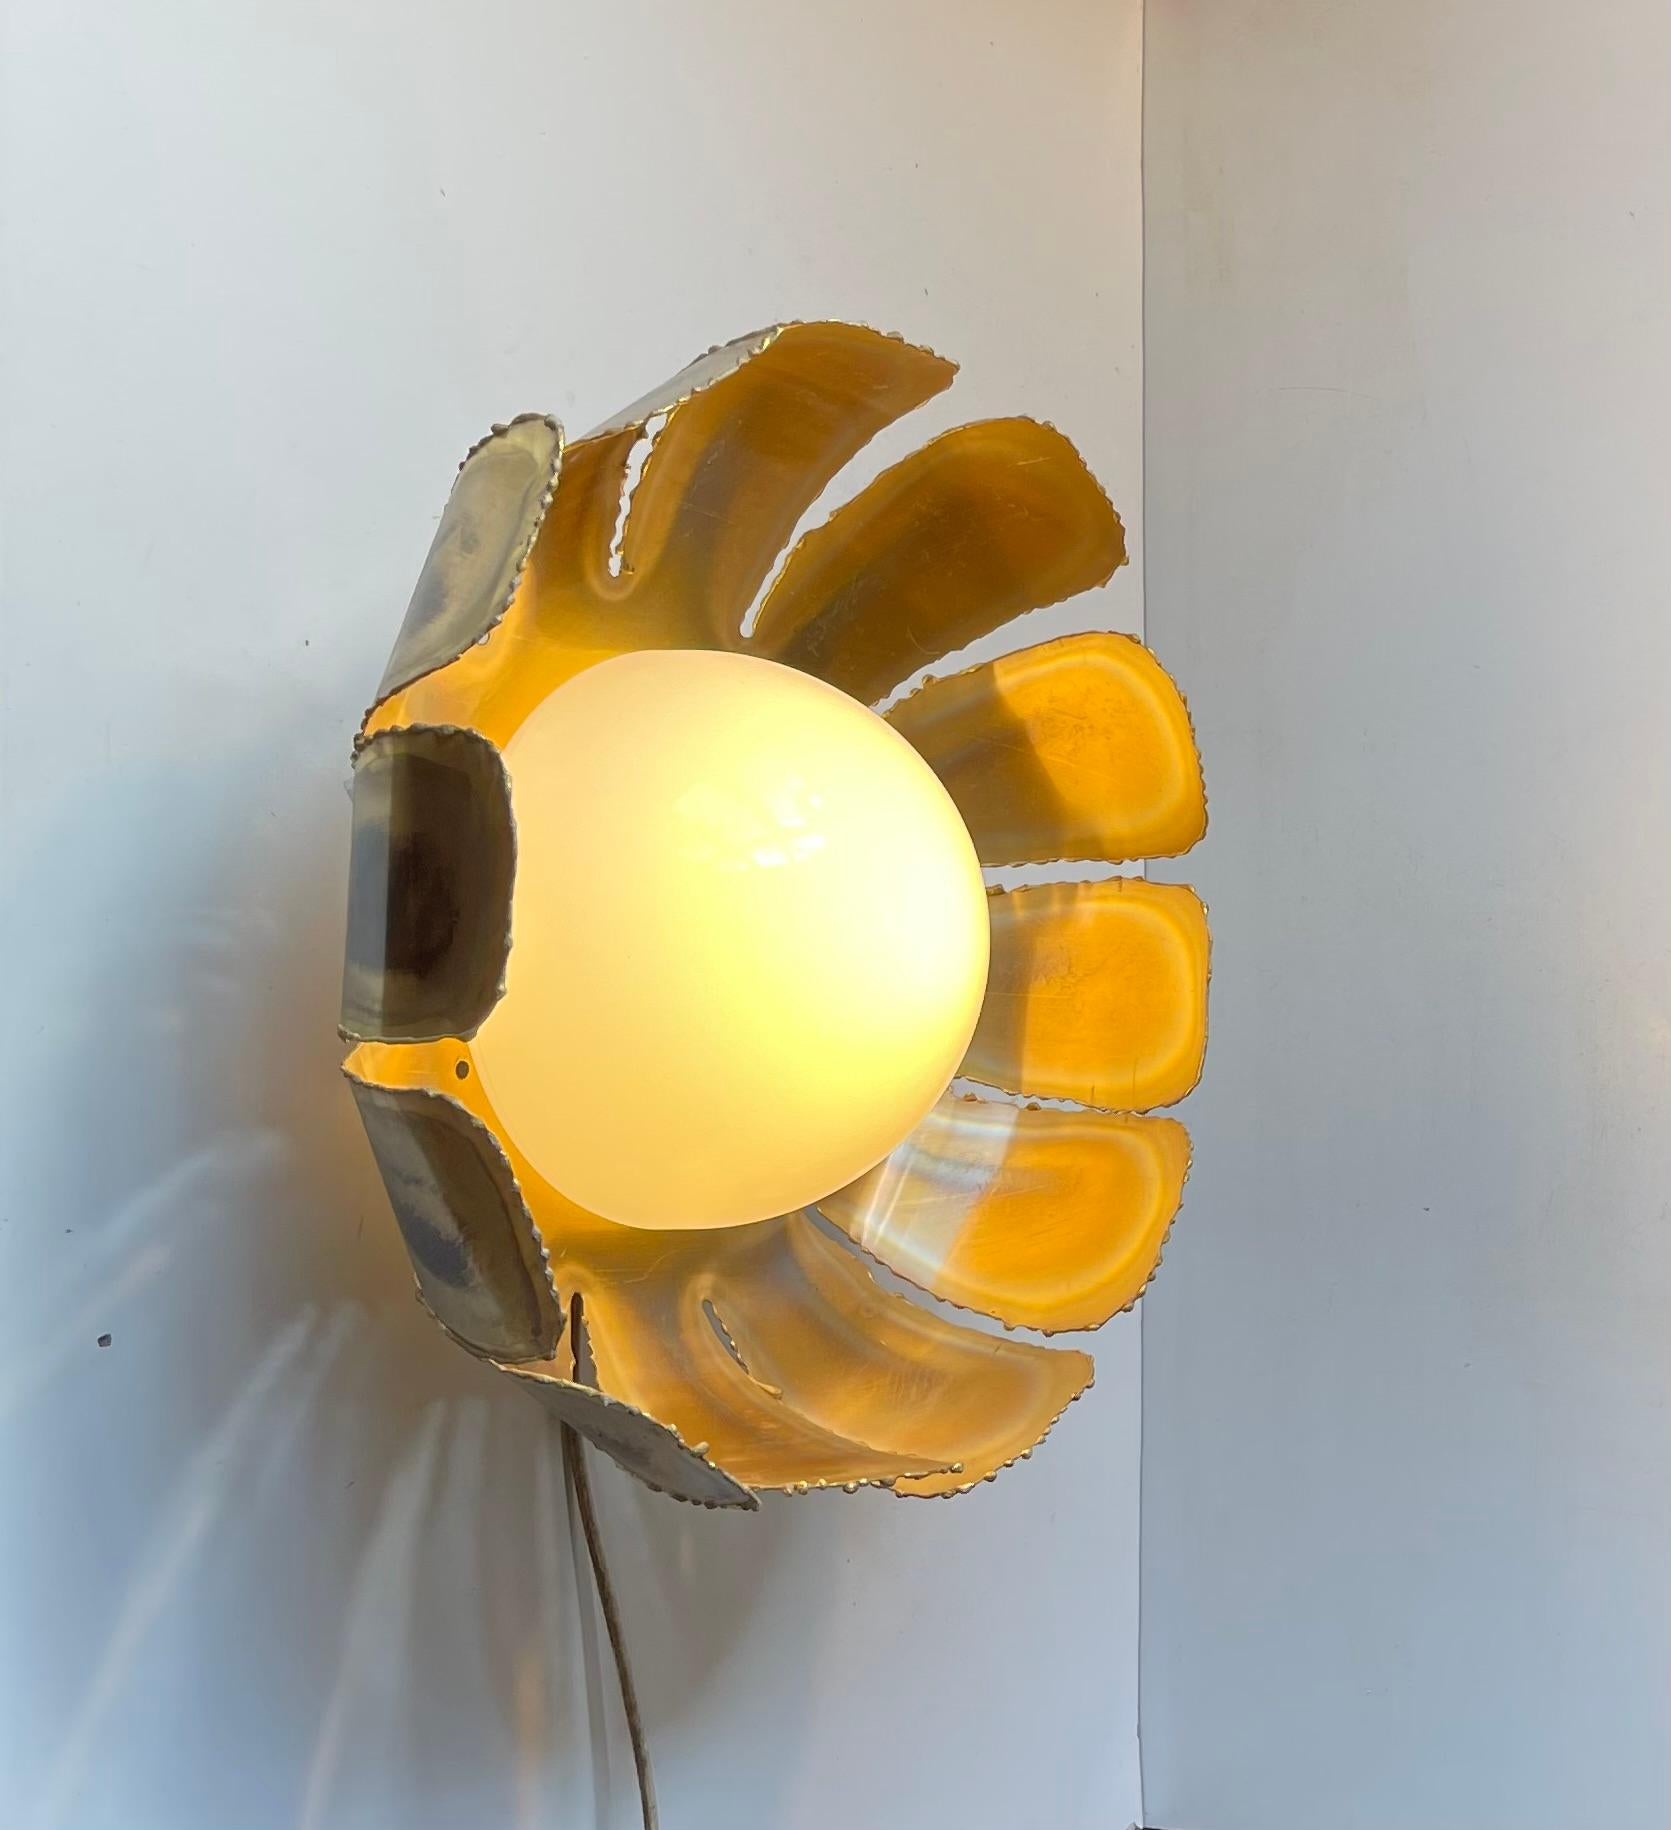 Danish Brutalist sunflower shaped wall sconce or ceiling flush mount. Its made from acid-treated and torch-cut brass featuring a center shade in white opaline glas This rare model was designed by Svend Aage Holm Sorensen in the early 1960s. A great